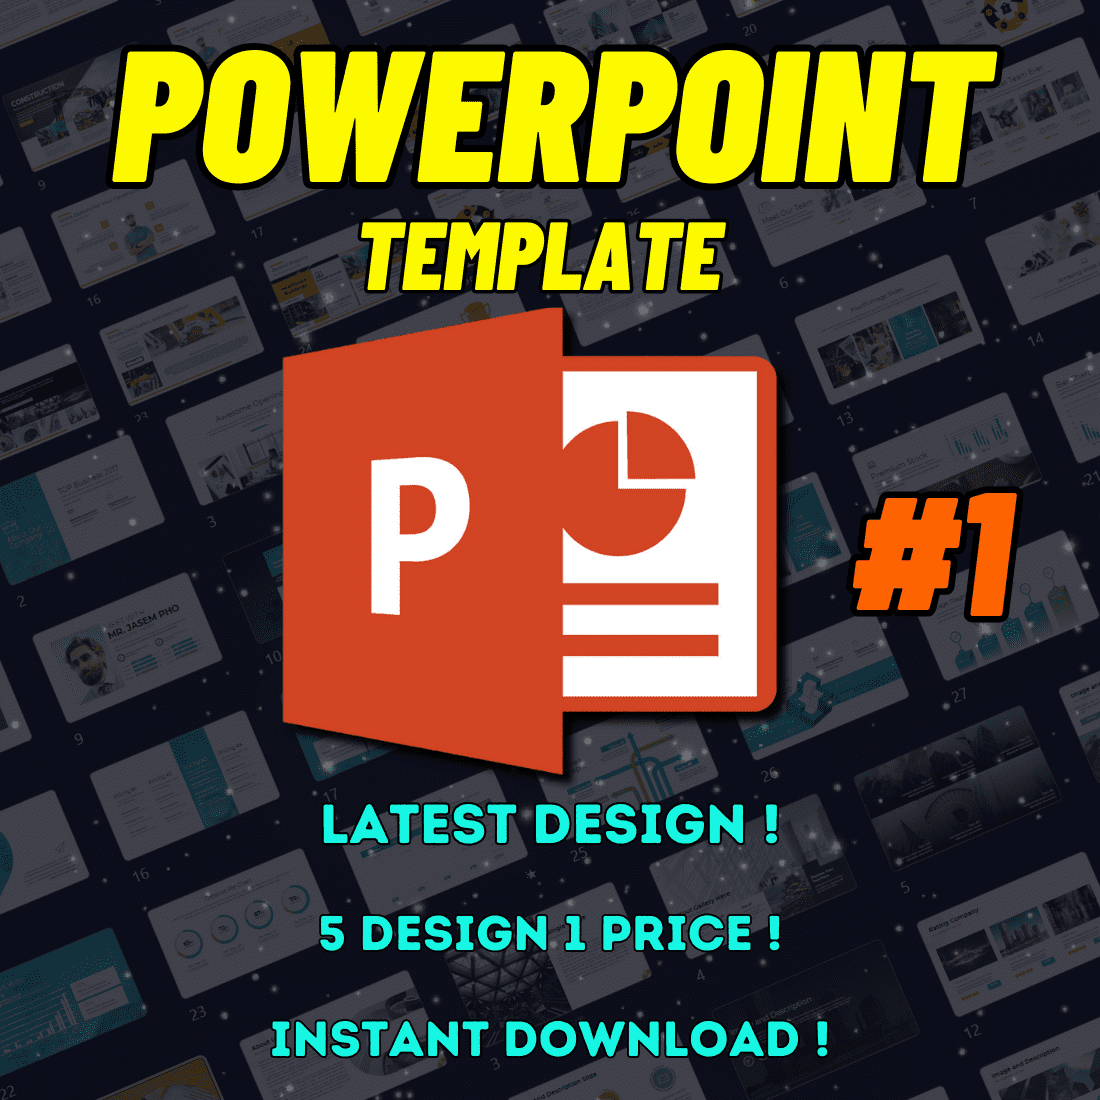 Powerpoint Templates #1 preview image.